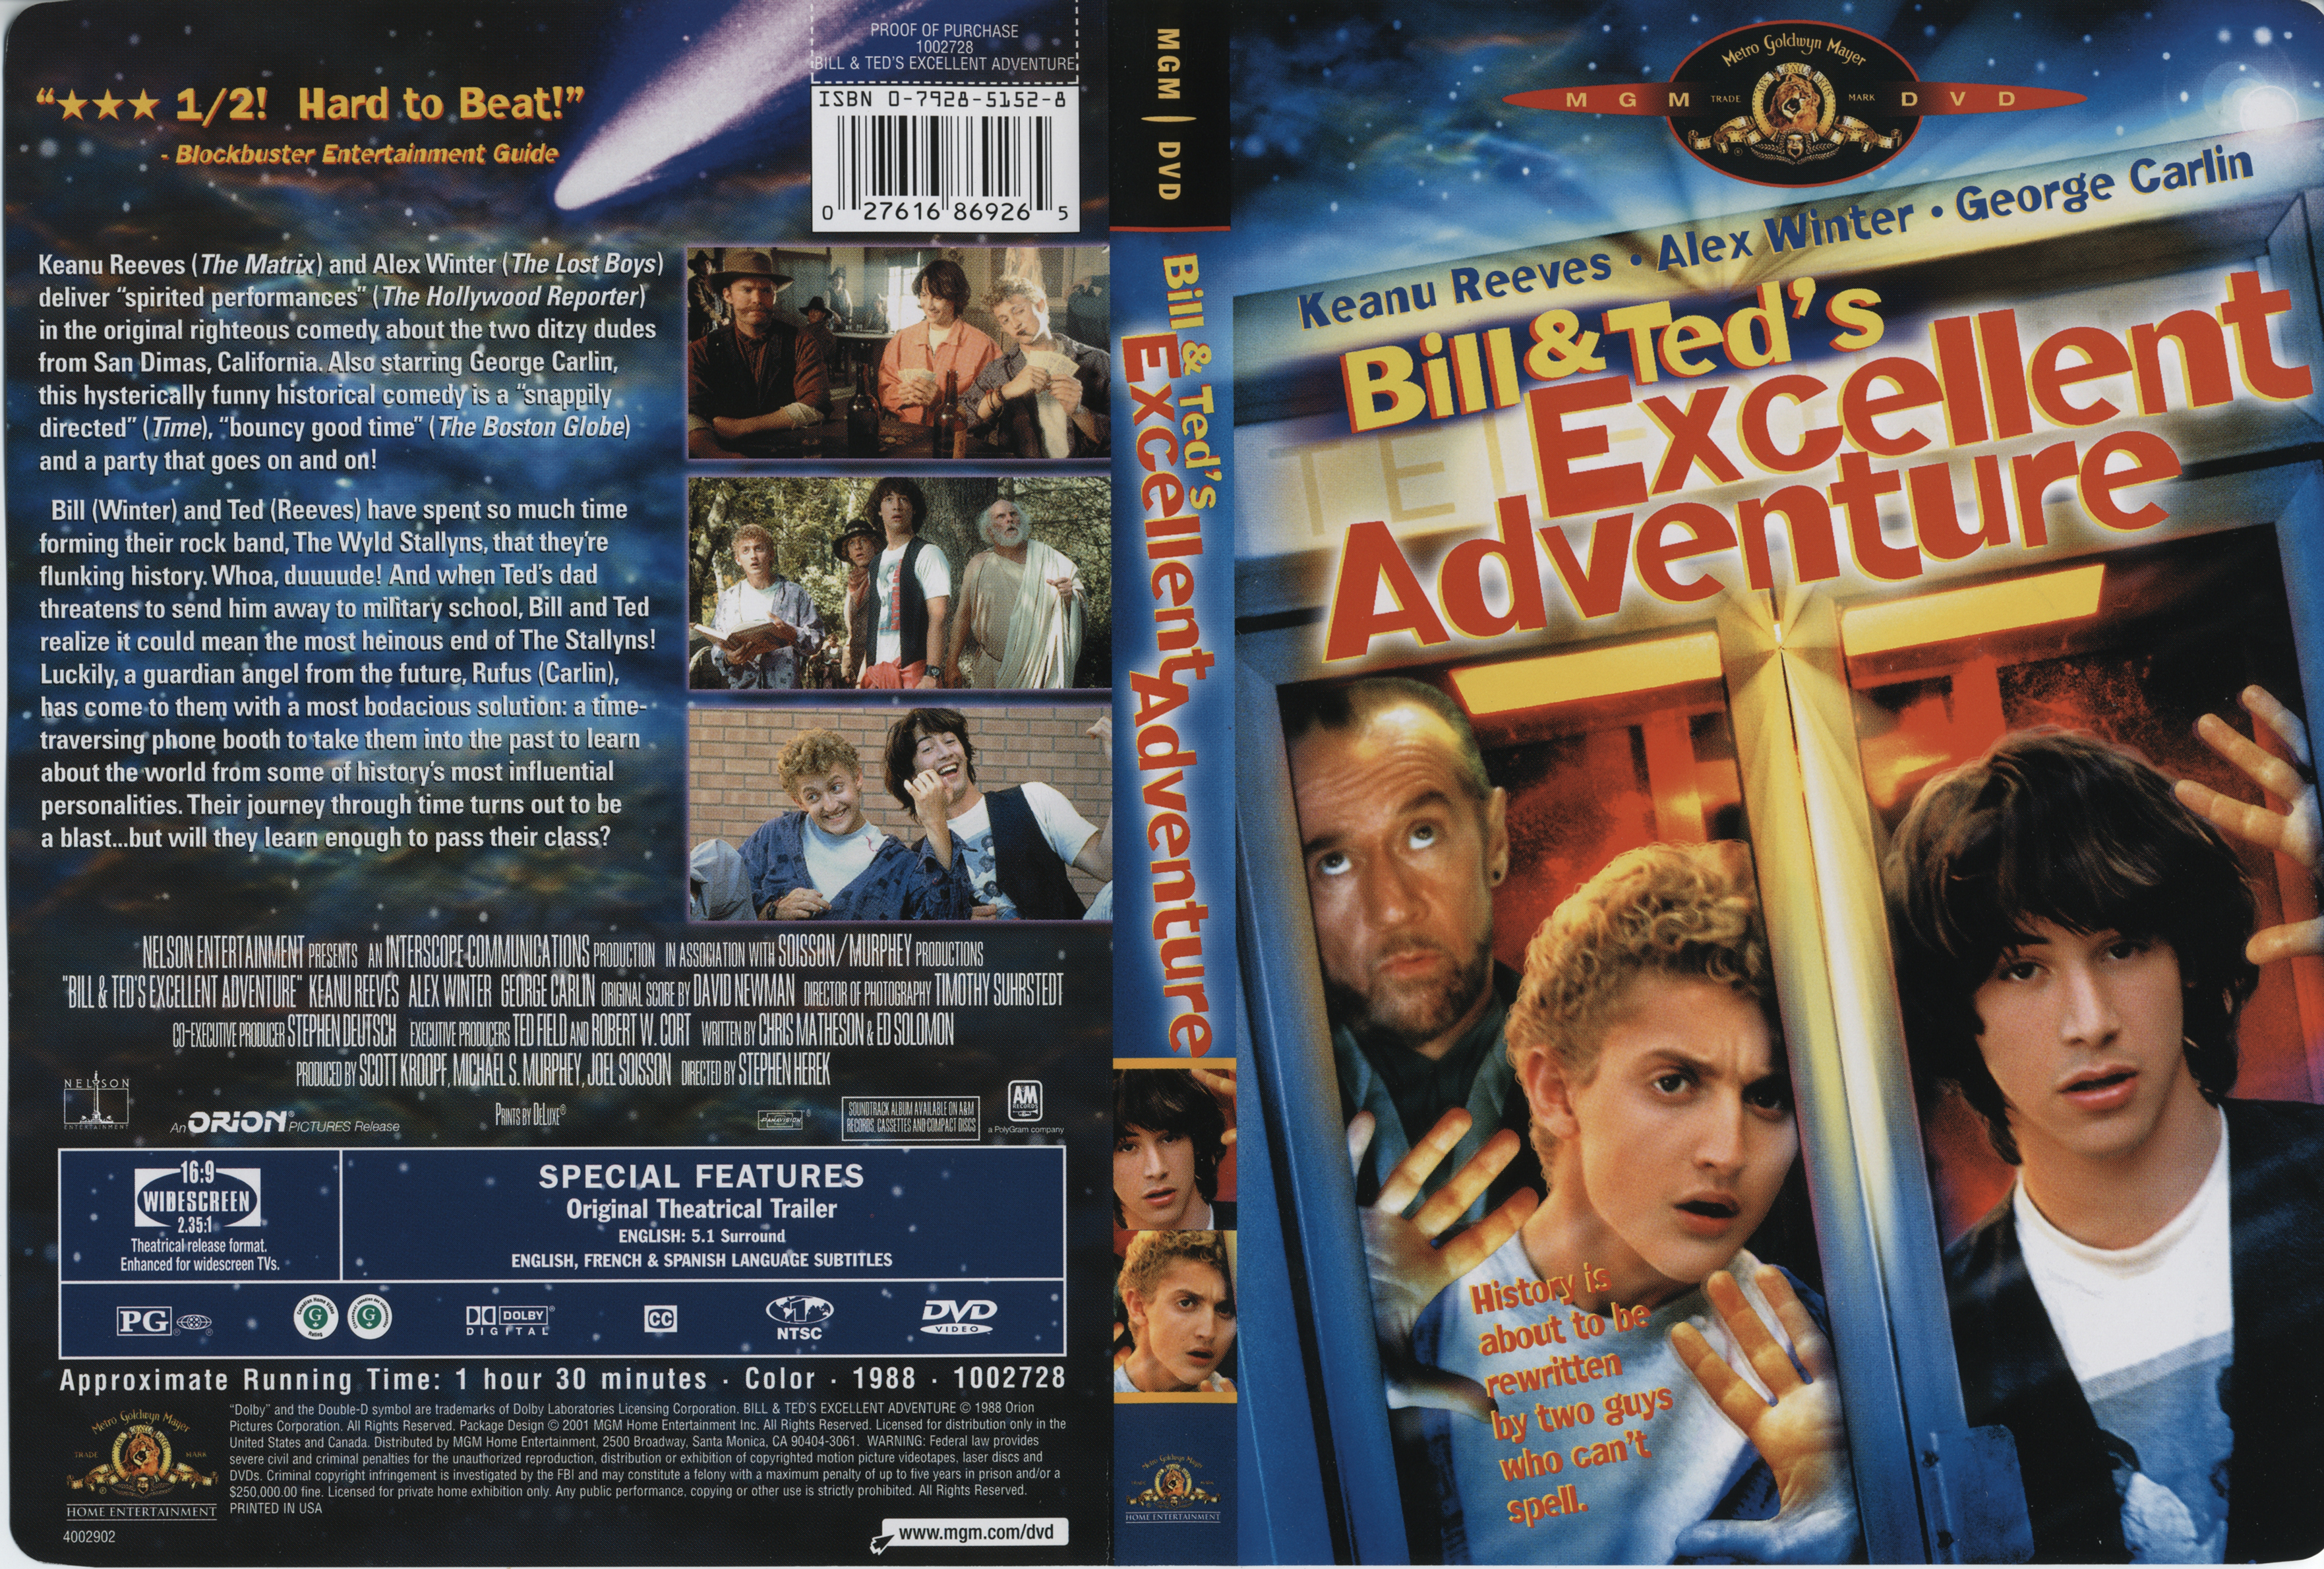 Bill & Ted's Excellent Adventure #18